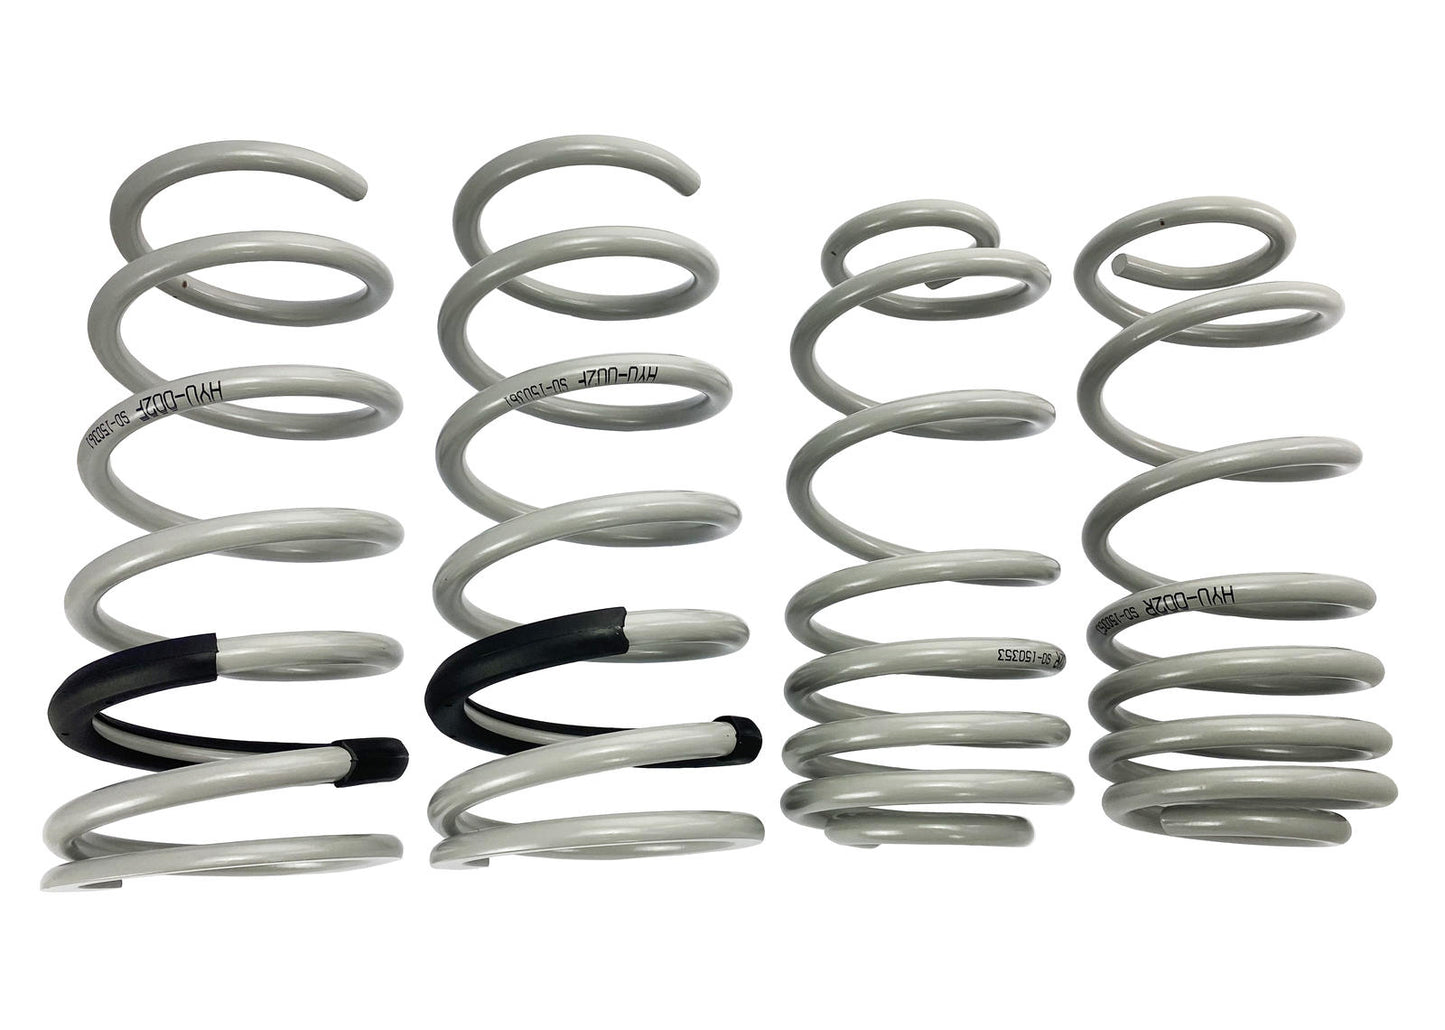 I20N Front and Rear Lowering Springs Whiteline